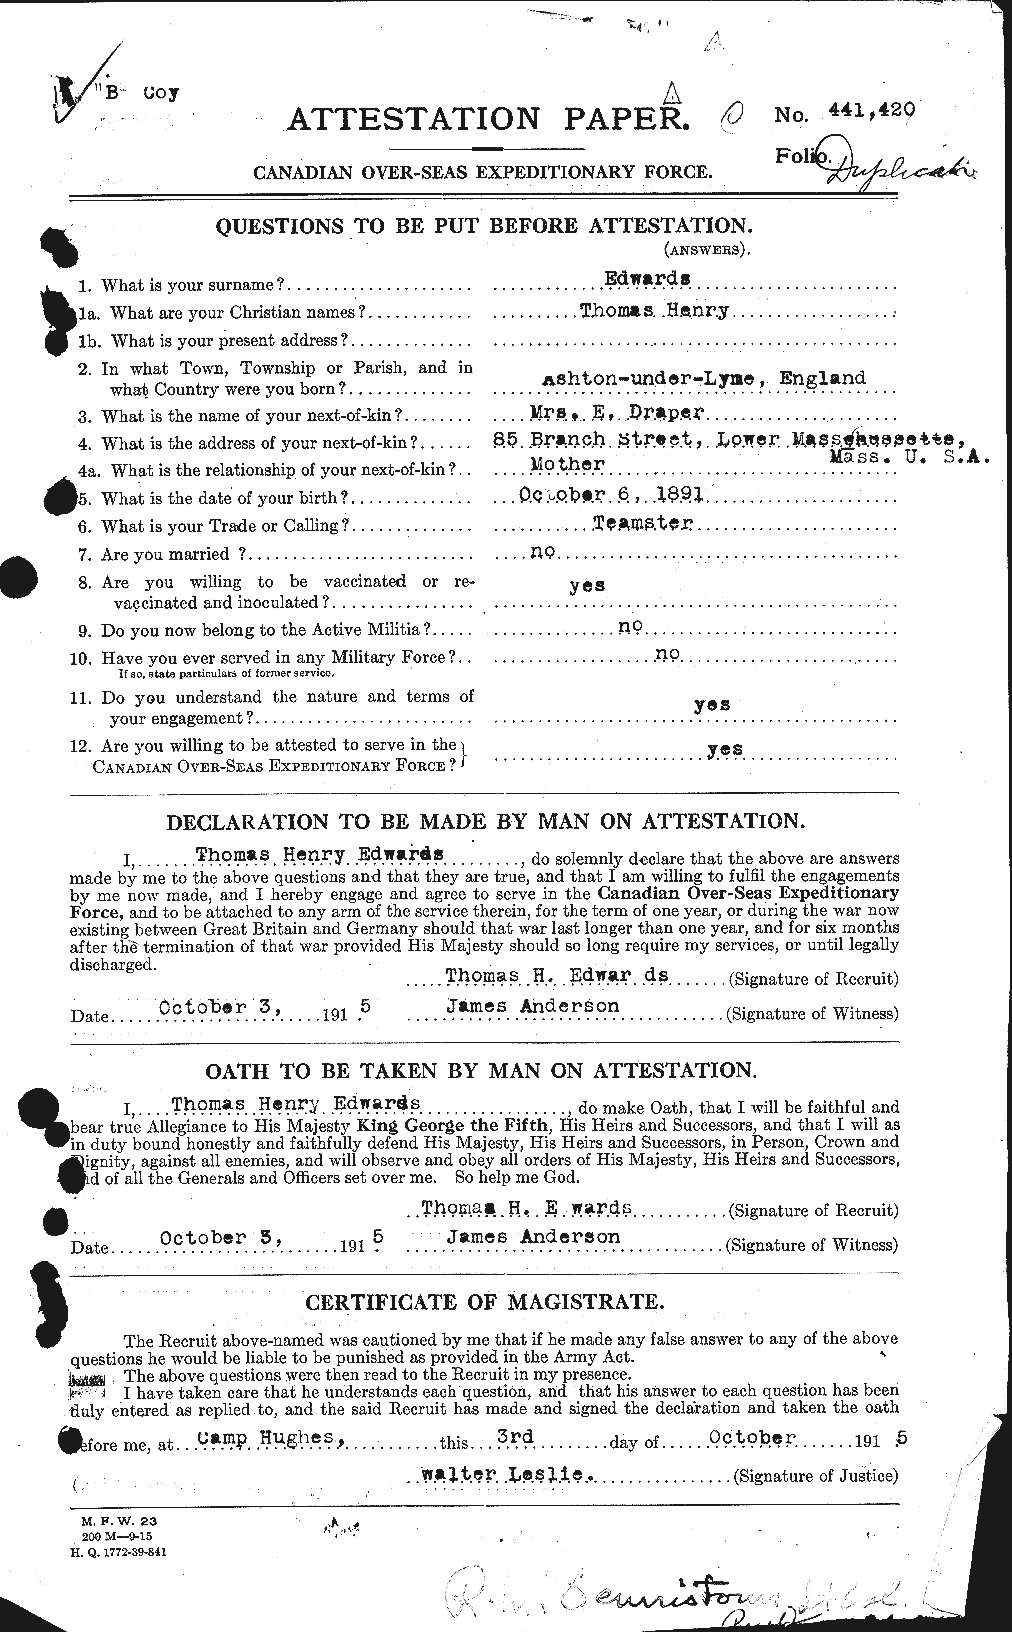 Personnel Records of the First World War - CEF 310347a